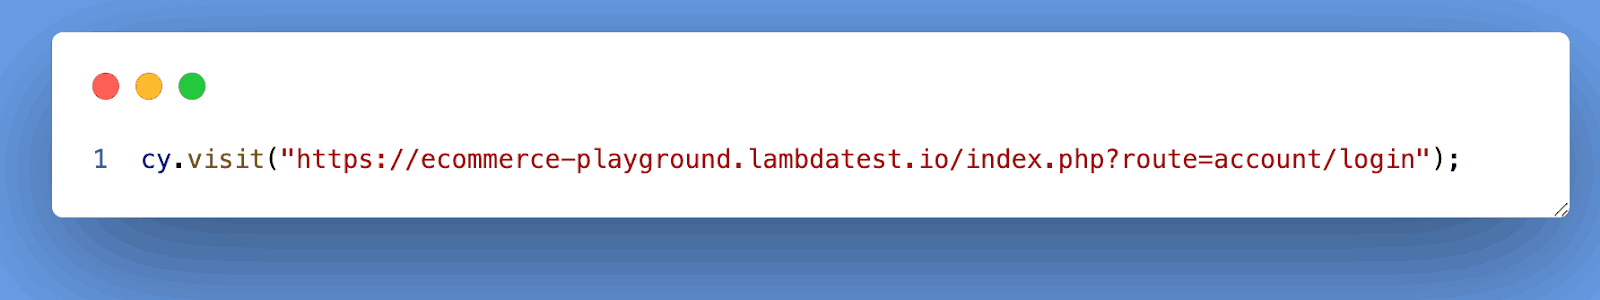 login page of the LambdaTest application